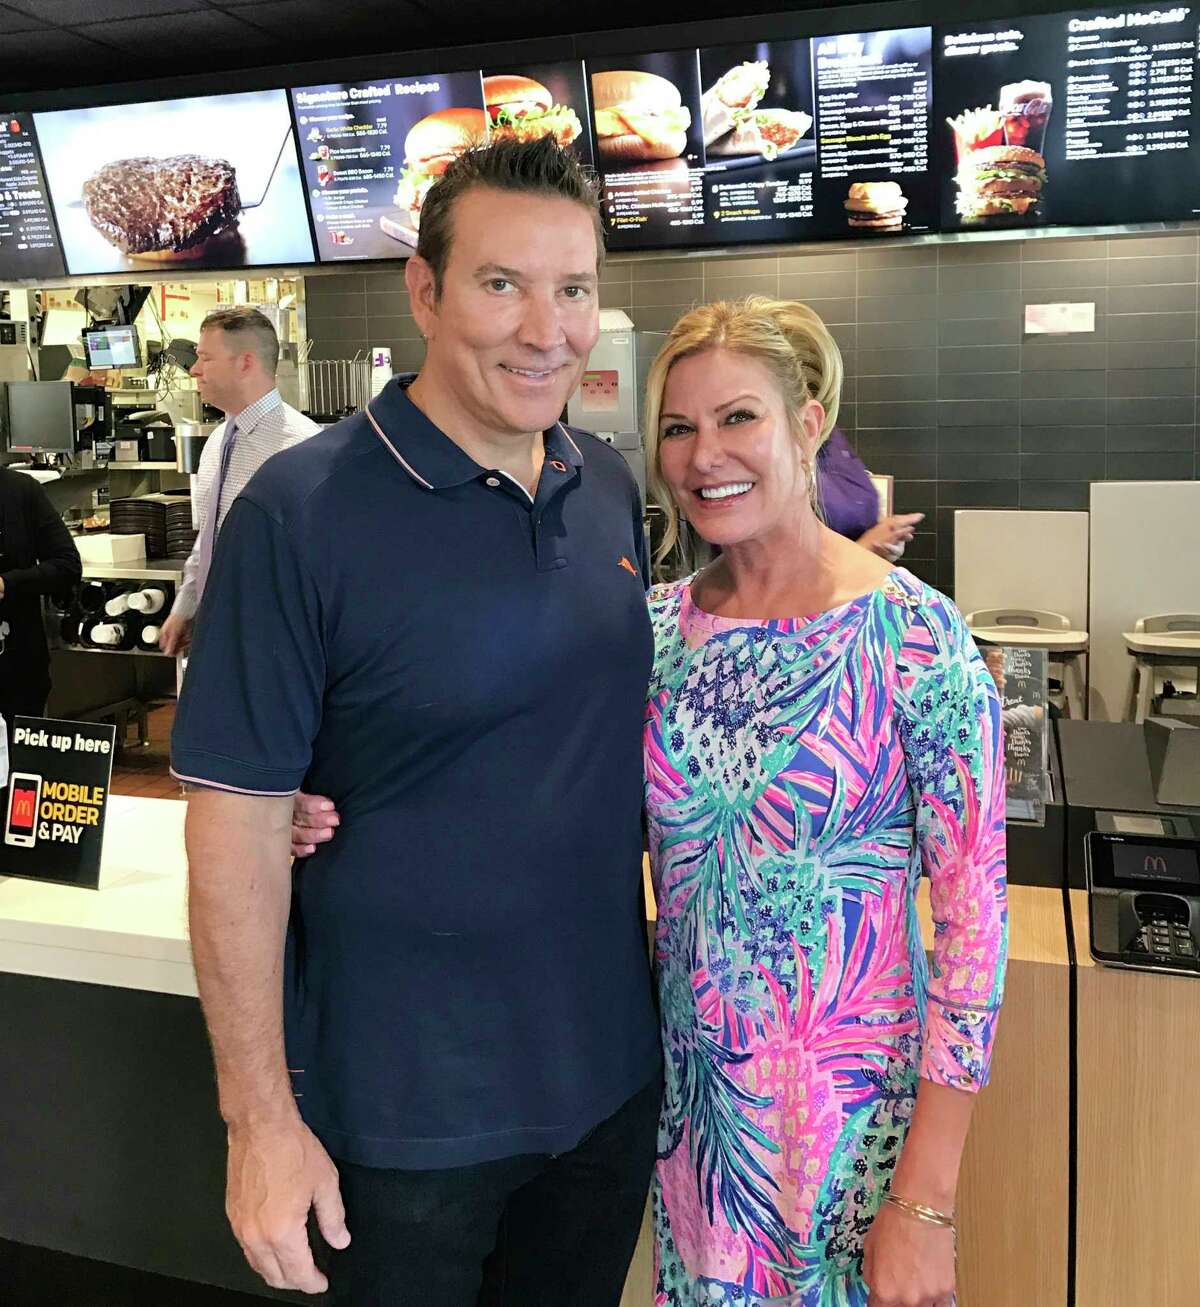 Michigan natives Matt and Lori Schulz are now the new owner/operators of the Reed City McDonald's restaurants. (Courtesy photo)